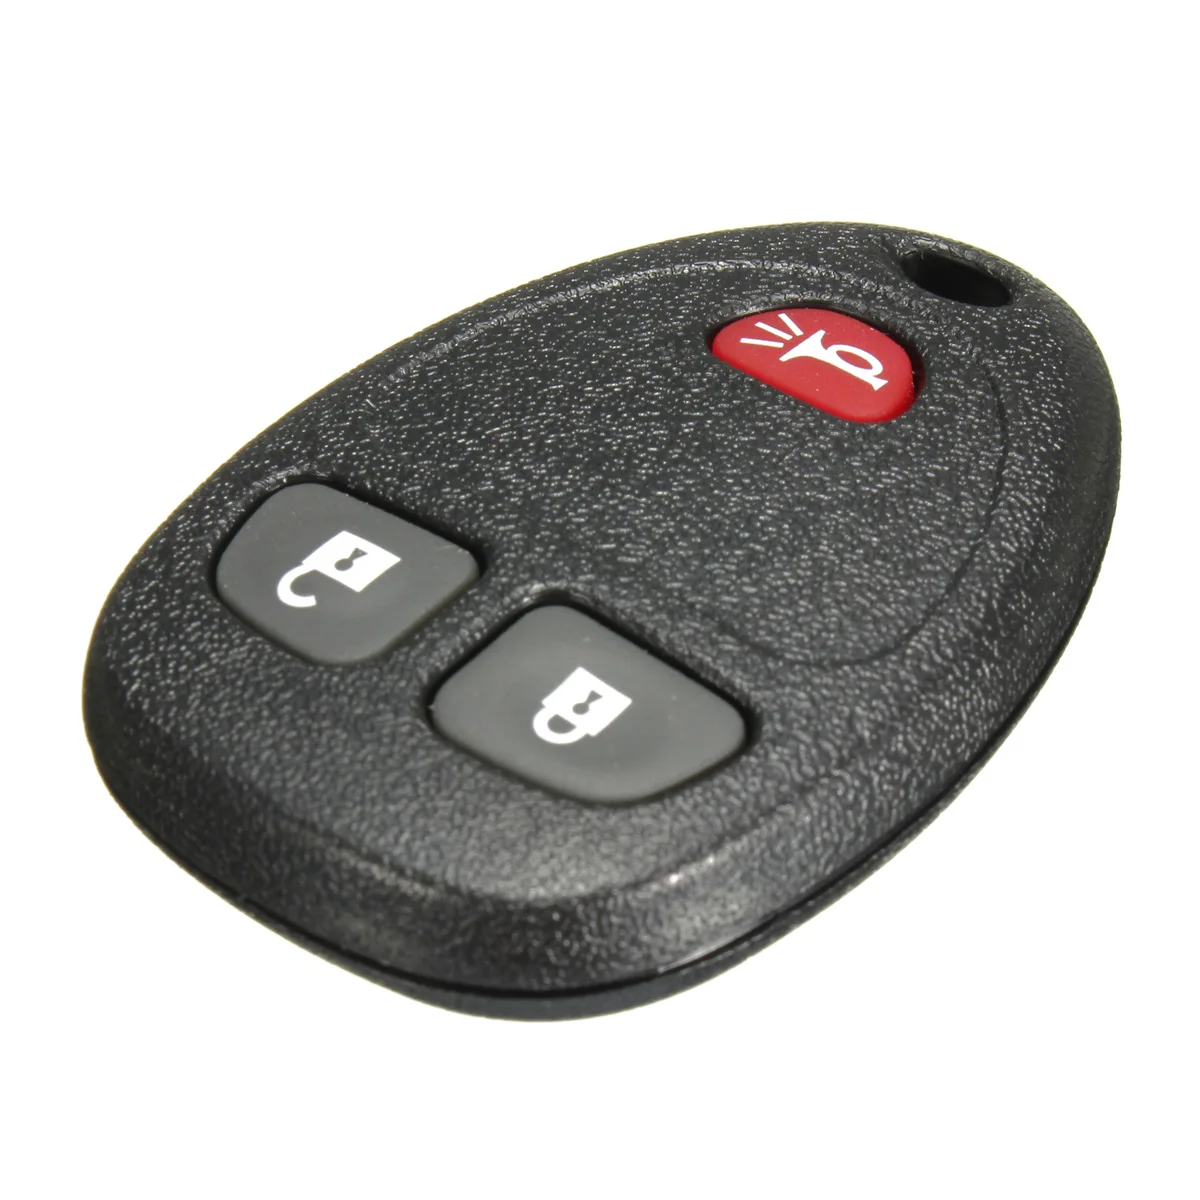 3 Button Replacement Keyless Entry Remote Key Fob Beeper For Chevrolet for Buick 2007- OUC60270